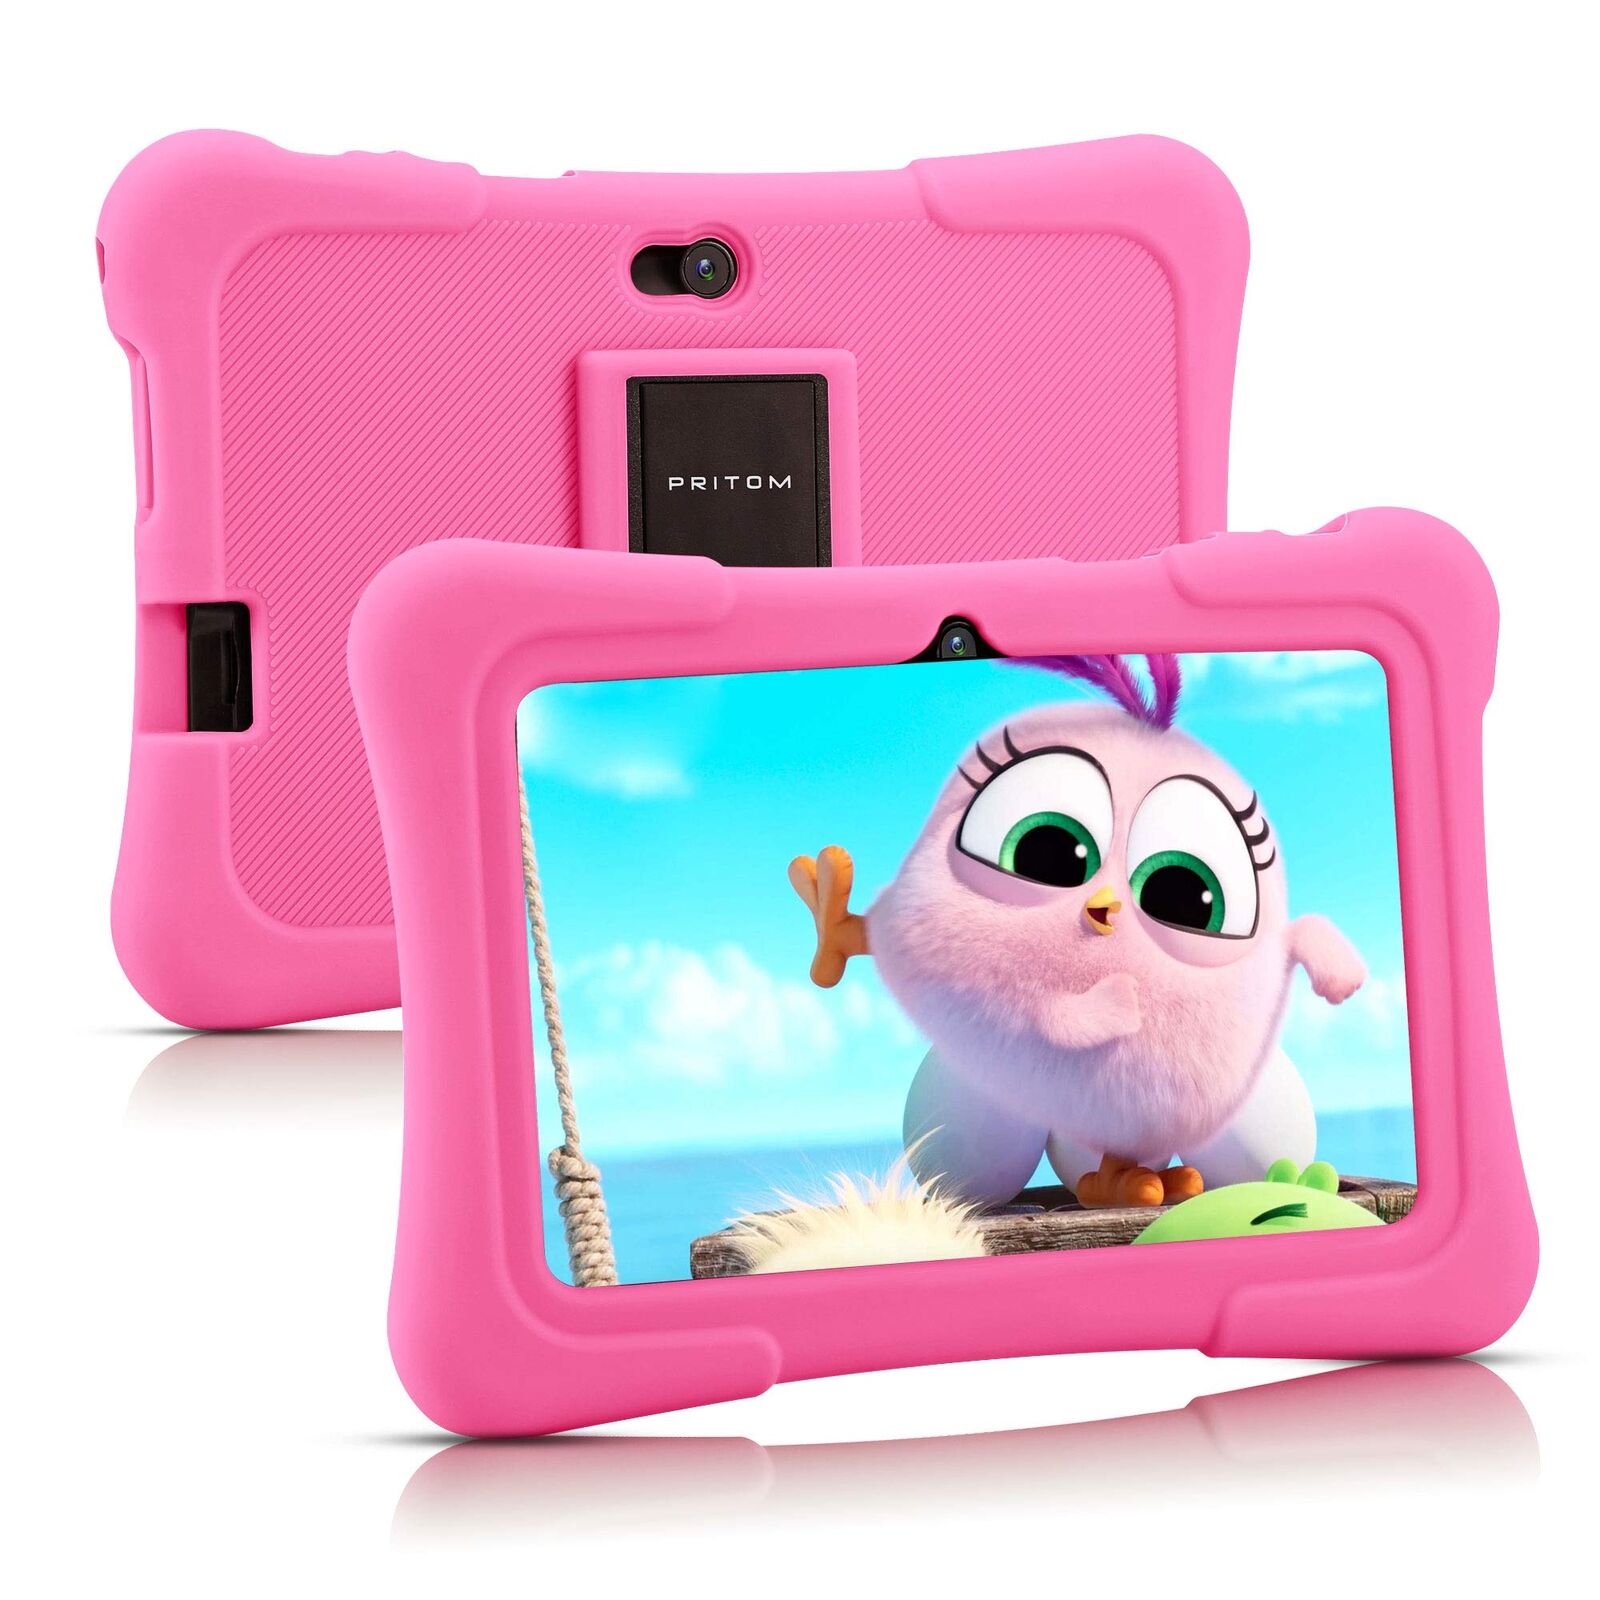 PRITOM Kid Tablet 7 inch Android Tablet for Kids 16GB Bluetooth WiFi Dual Camera